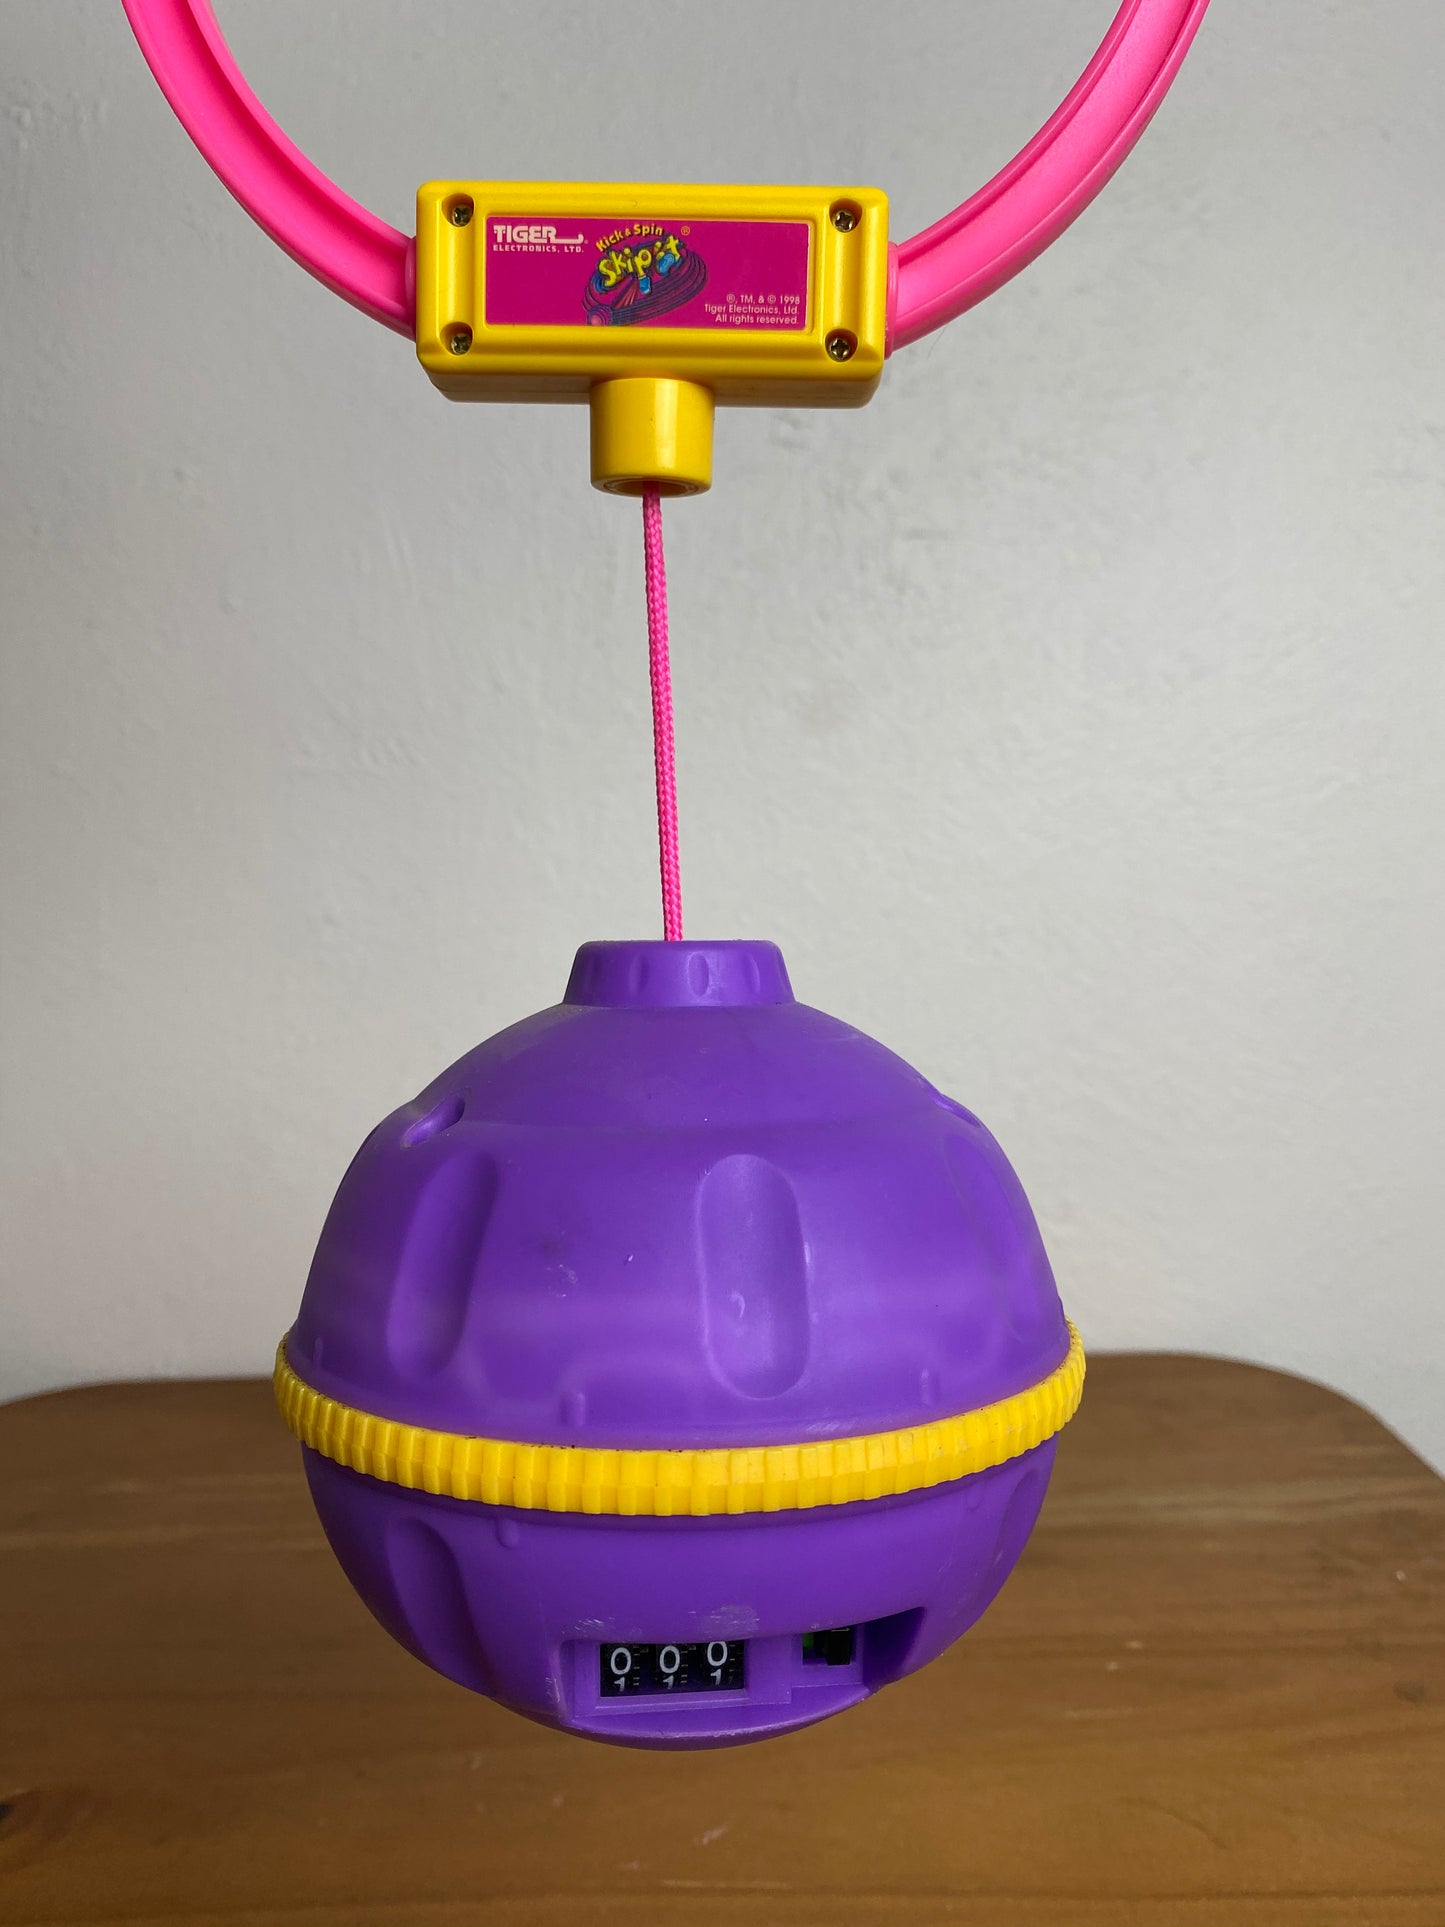 Skip-It, the highly addictive '90s toy that forced you off the